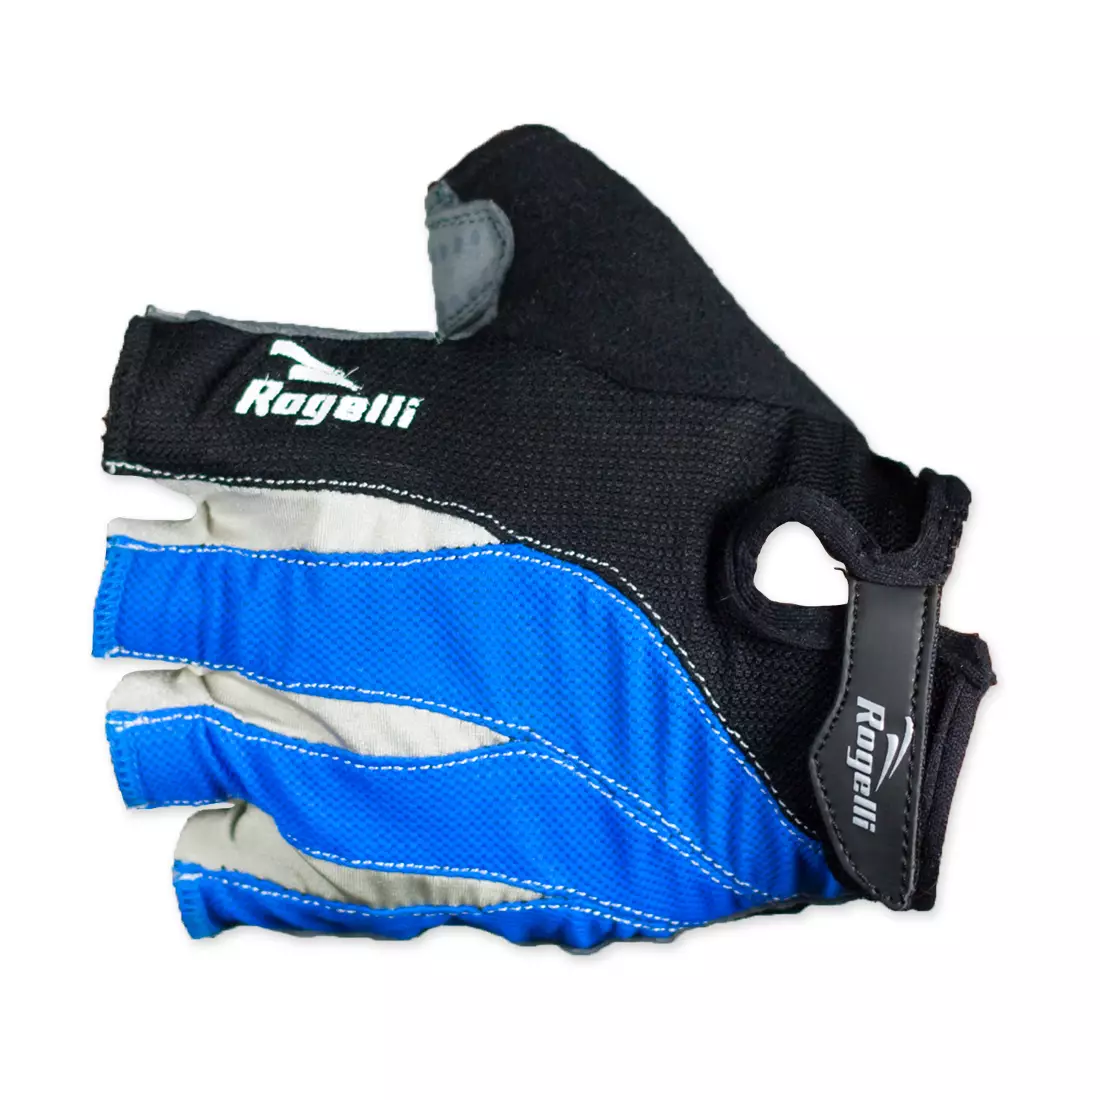 ROGELLI ATLIN cycling gloves, red